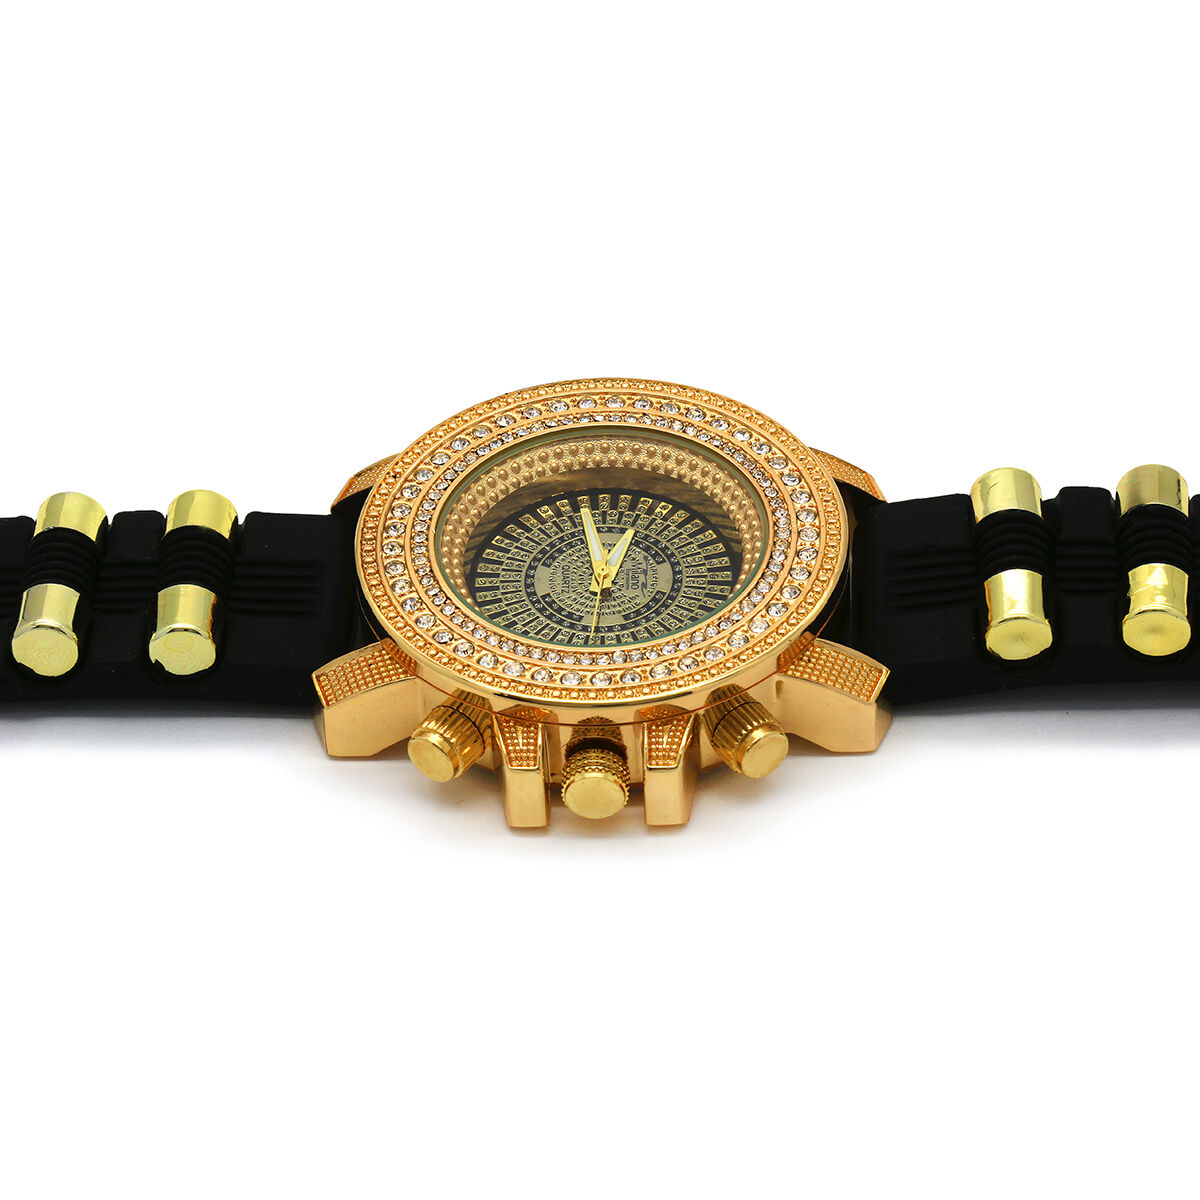 Gold Ice Out Milano Black Silicone Band Watch